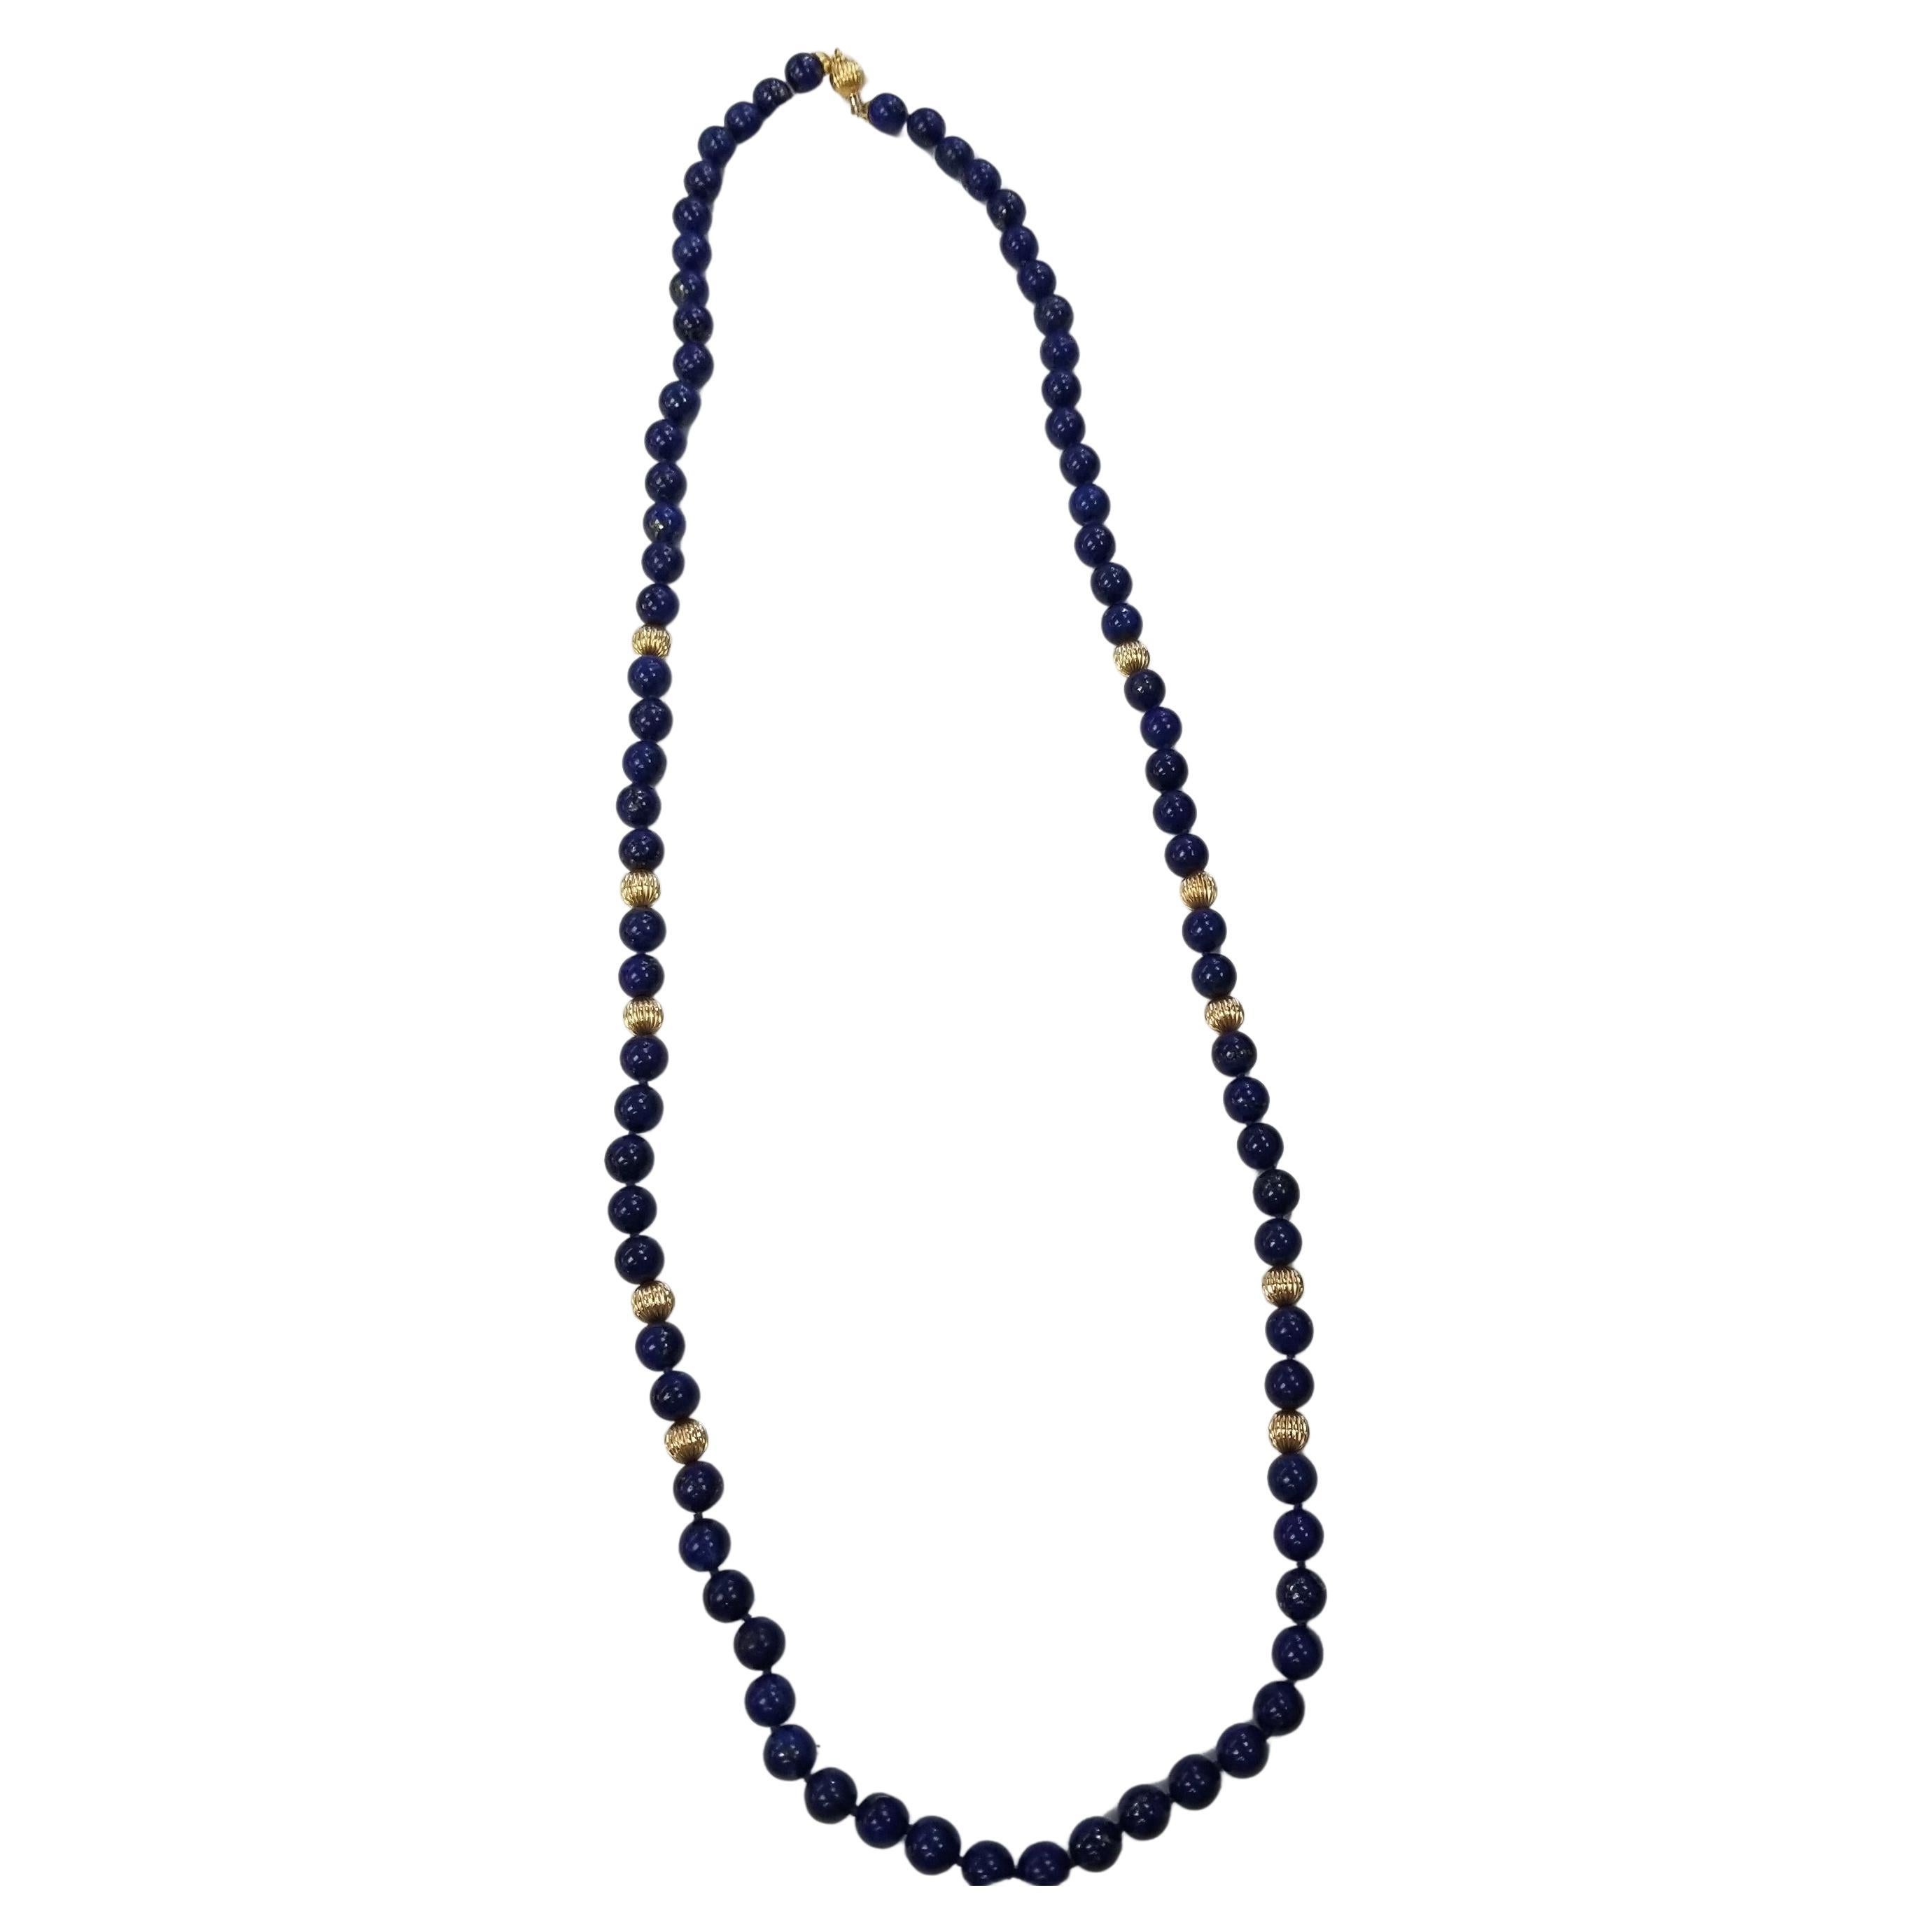 Lapis Lazuli 9.5 - 10mm Beads with 14k yellow gold Rondelle Necklace 36 inches